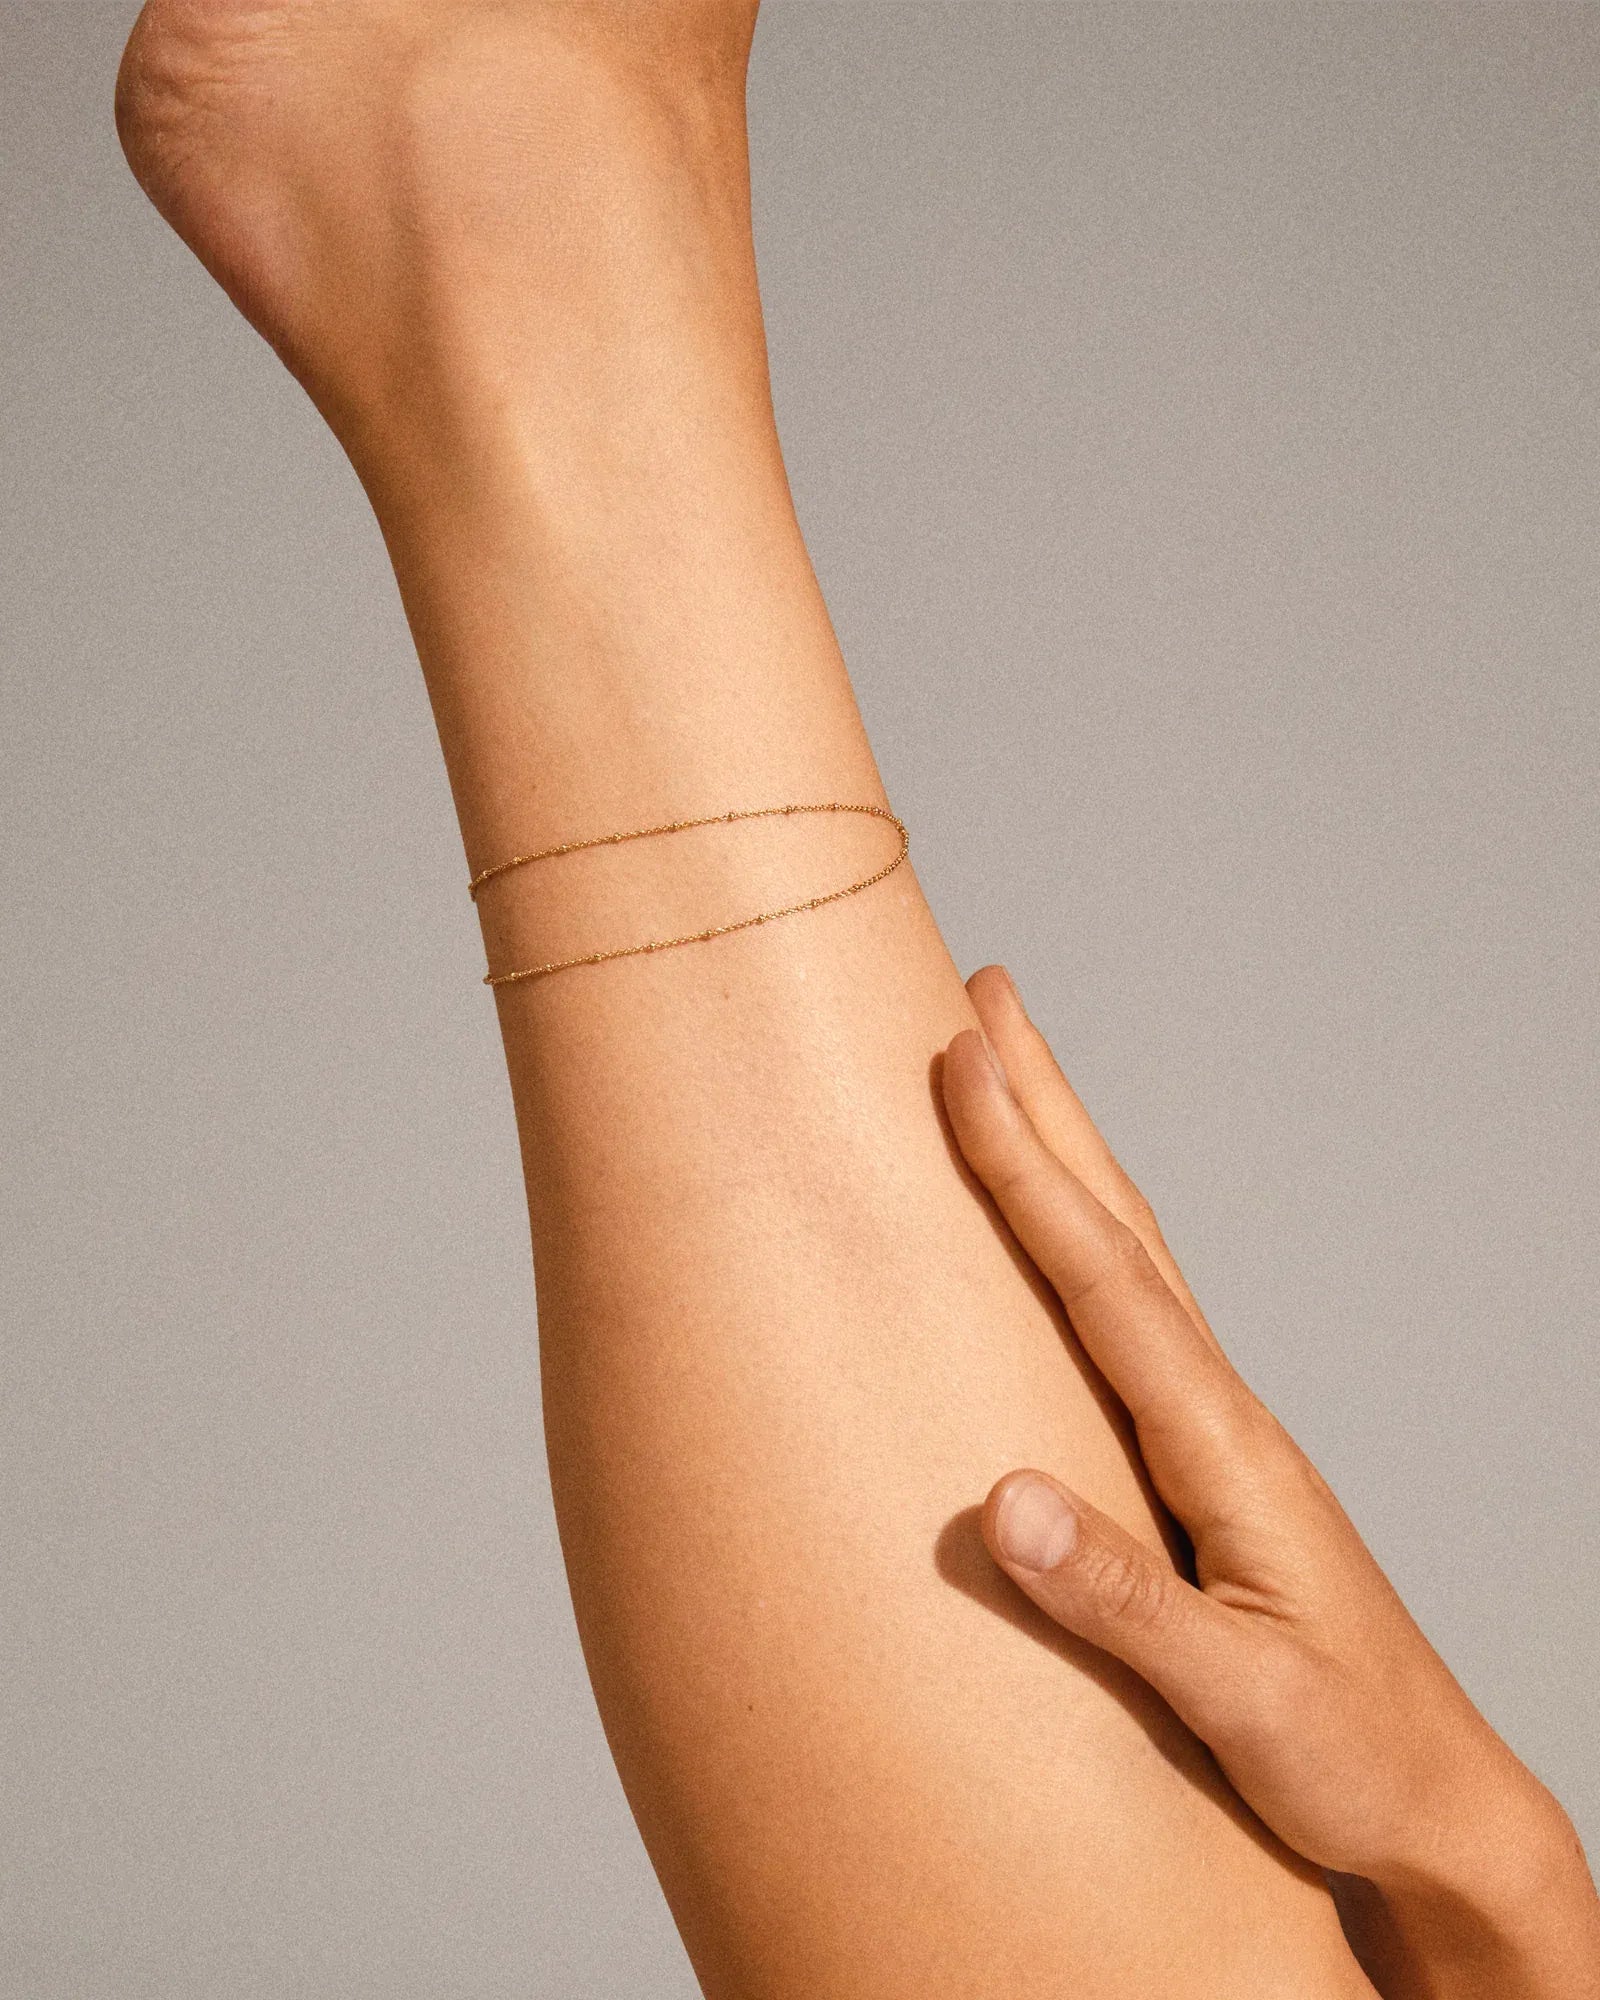 ELKA Ankle Chain 2-in-1 - Gold Plated